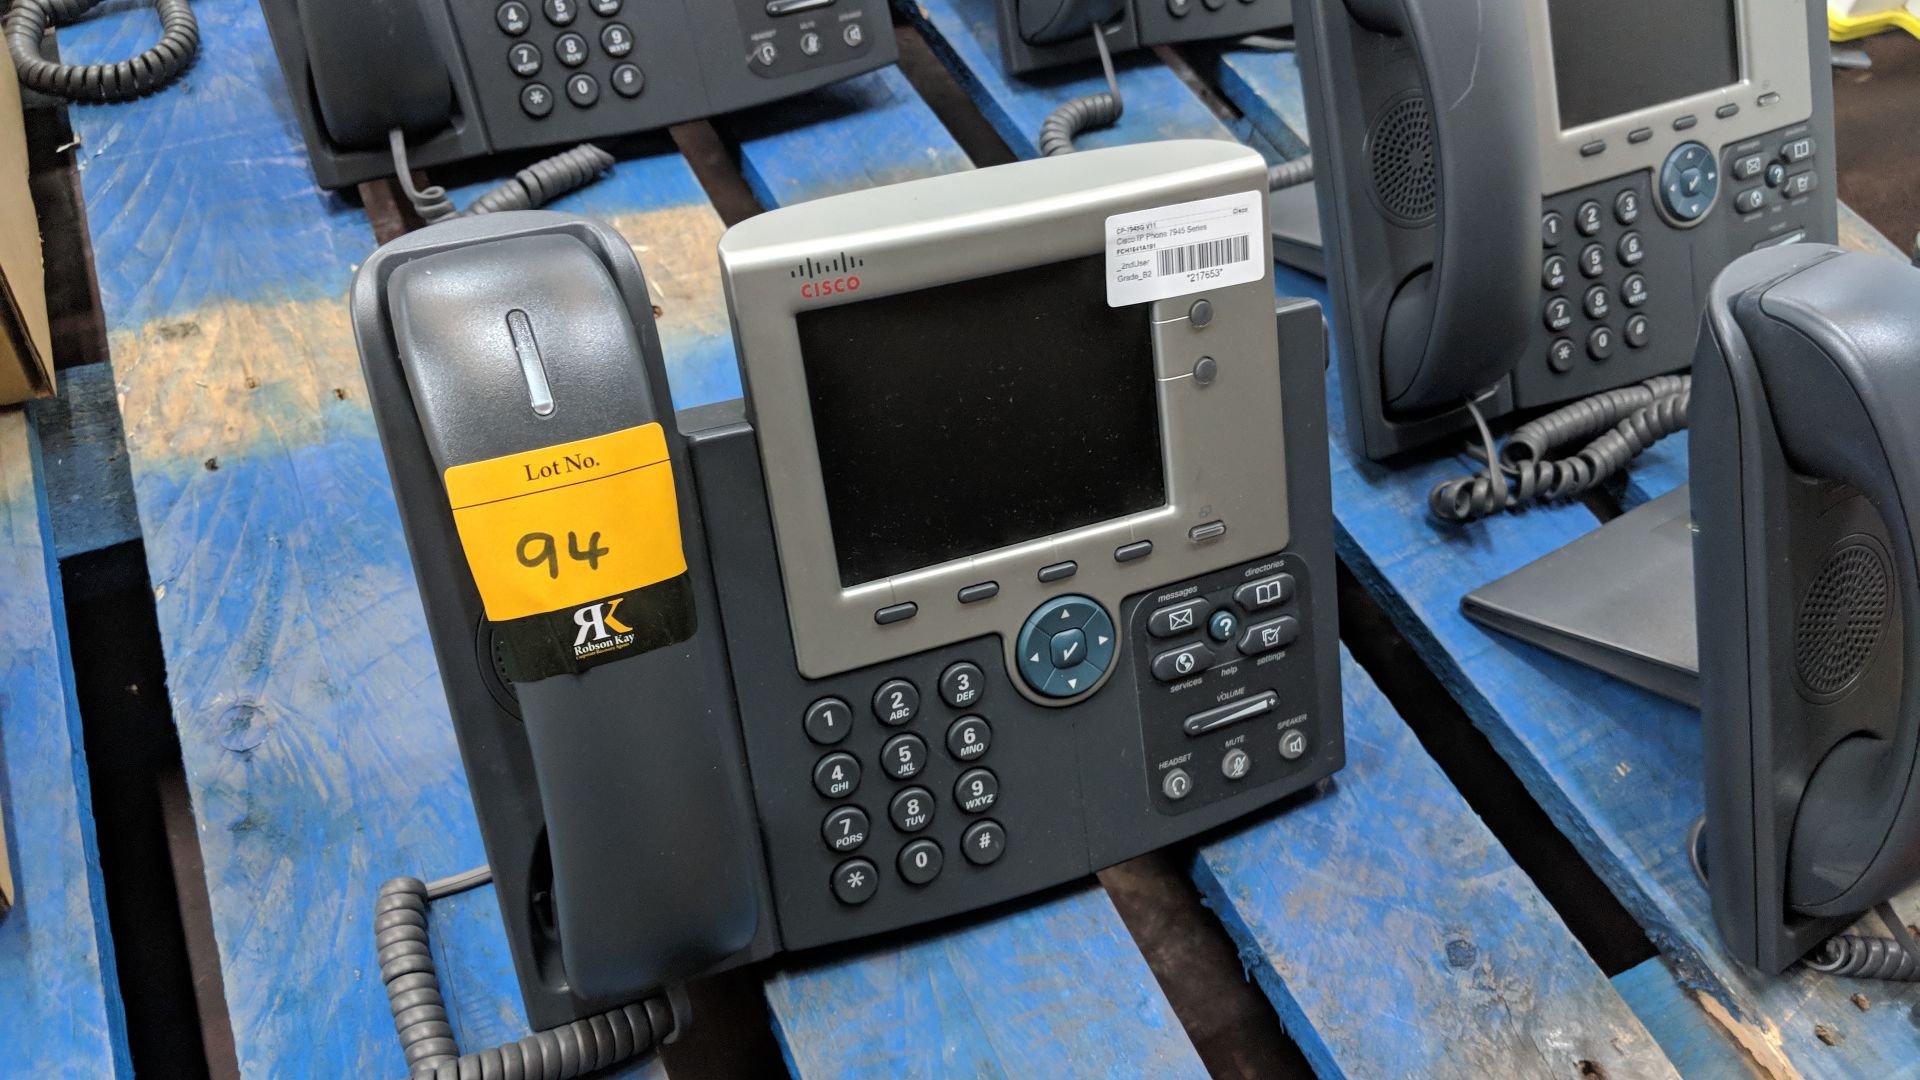 7 off Cisco model CP-7945G IP telephone handsets IMPORTANT: Please remember goods successfully bid - Image 2 of 8